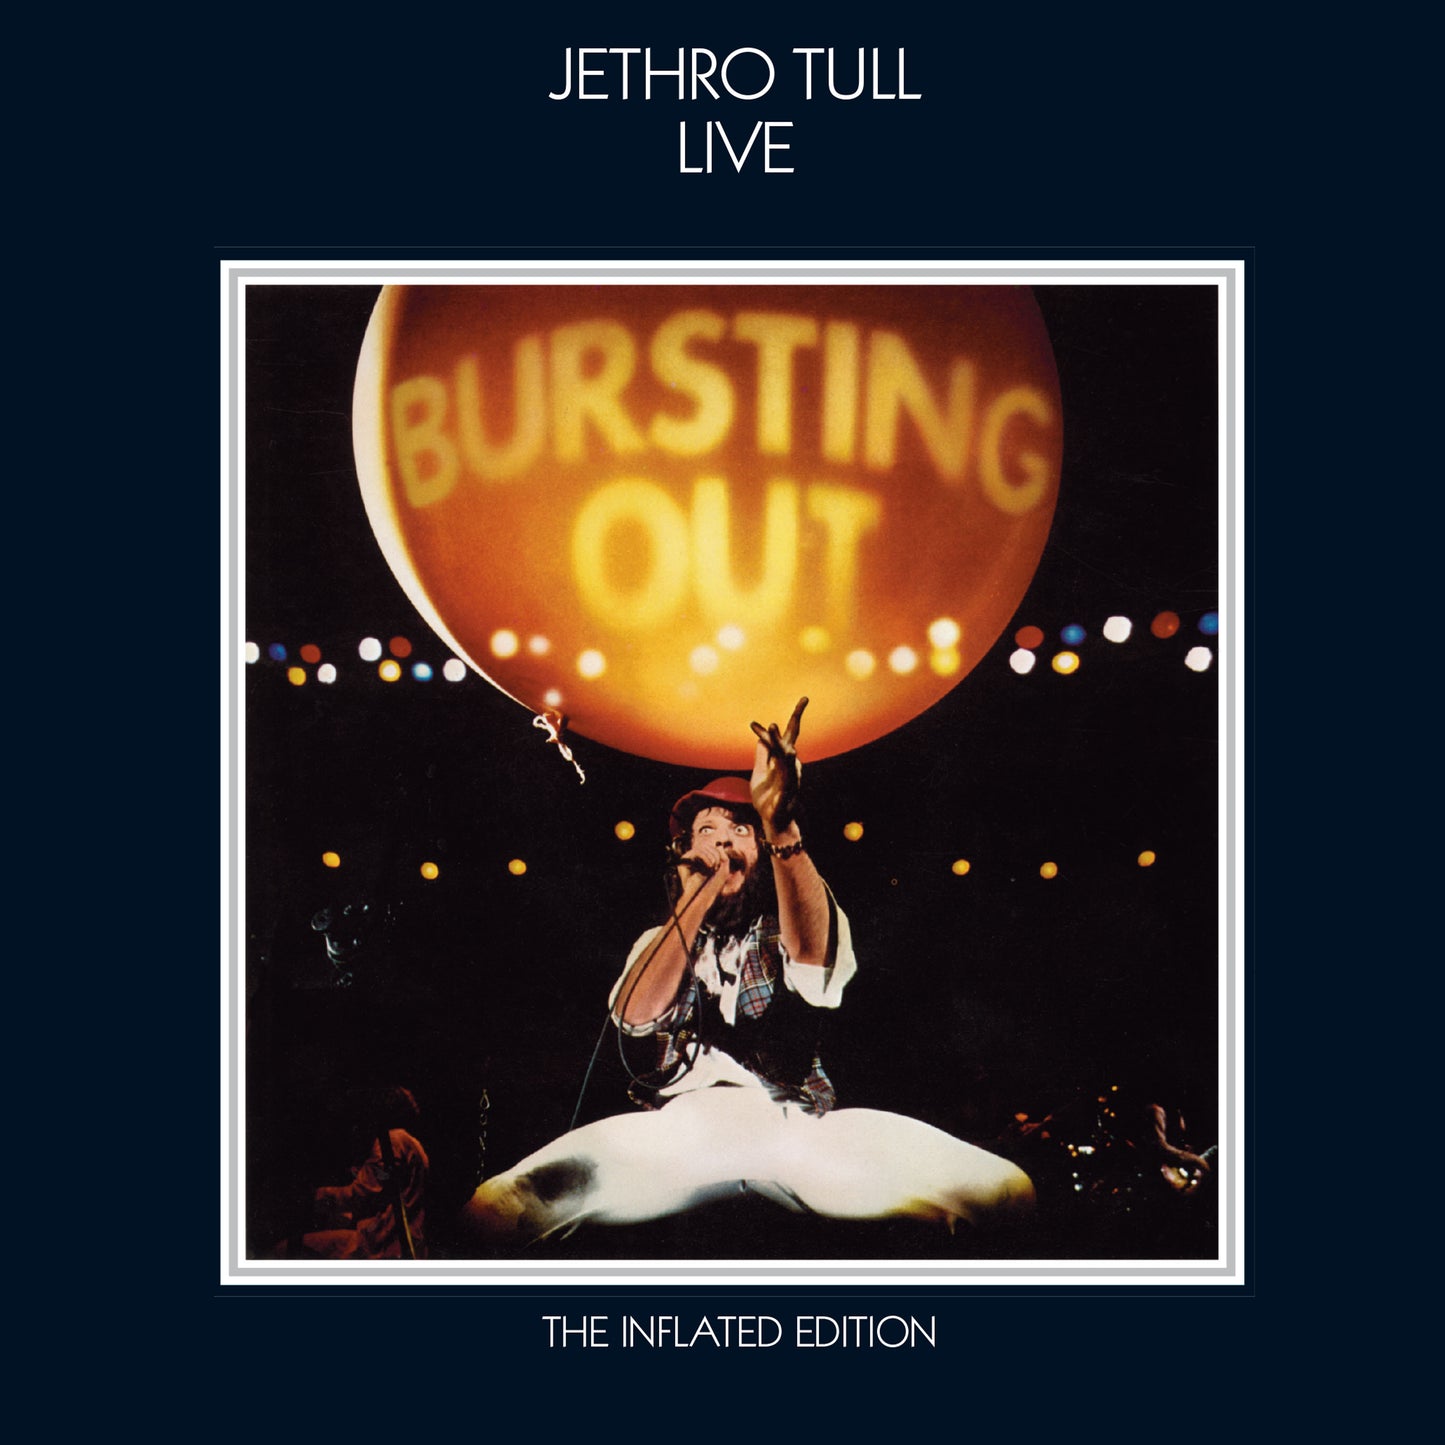 Jethro Tull Live / Bursting Out: The Inflated Edition 3CD+3DVD deluxe set